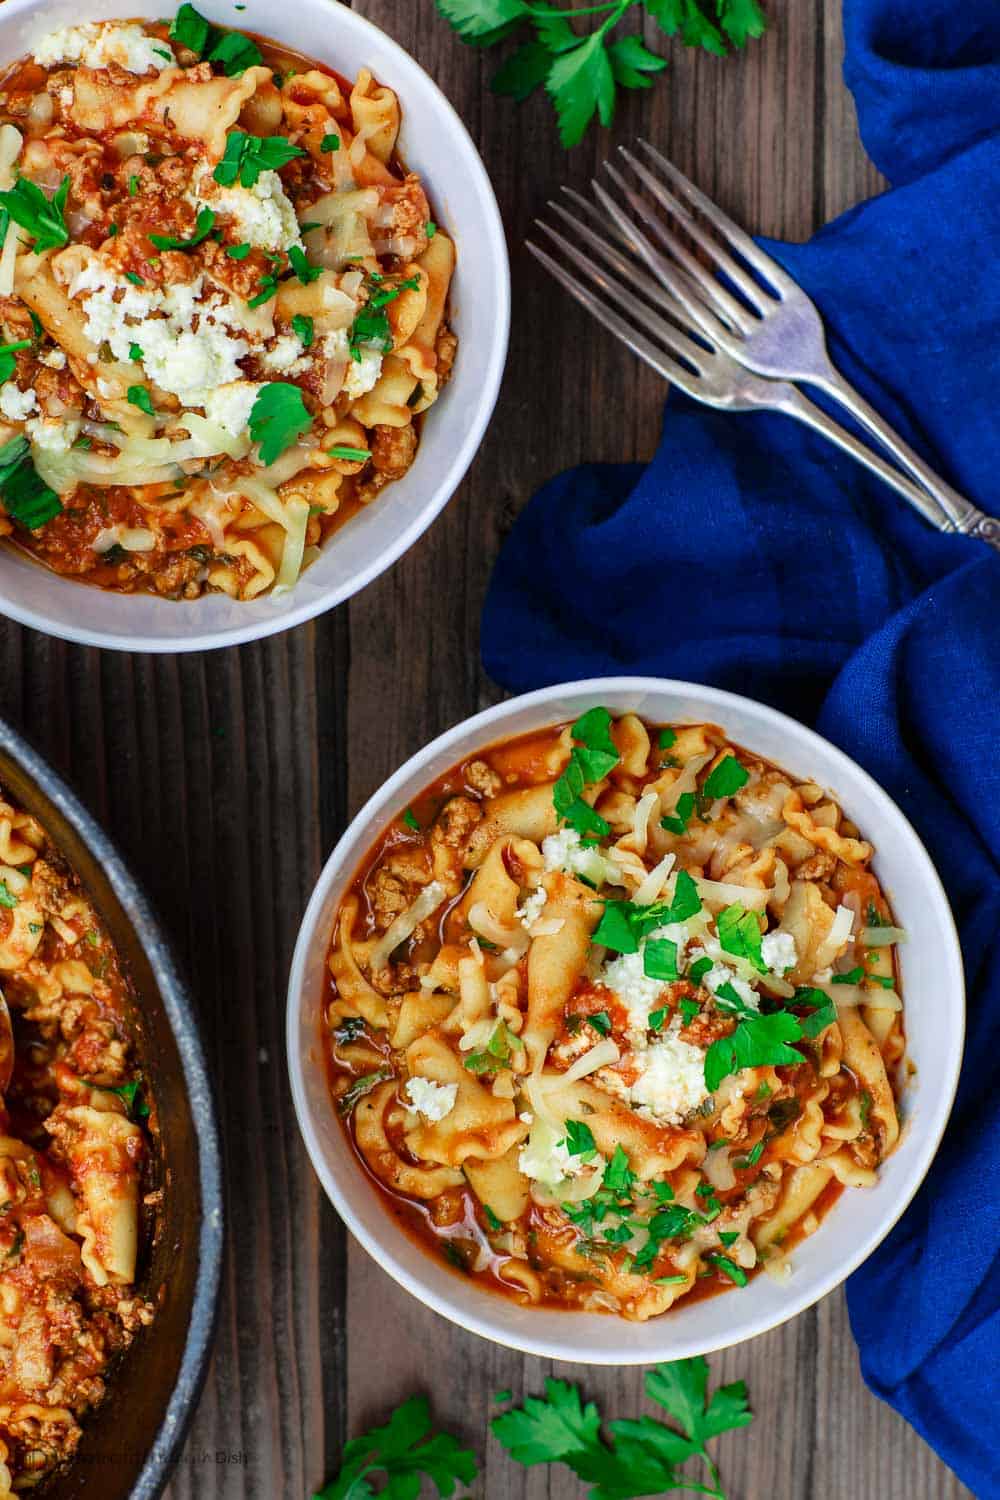 Turkey Lasagna Soup | The Mediterranean Dish. Healthier, lighter turkey lasagna soup is a riff off classic lasagna that is every bit as comforting and tasty. Plus EASY one-pot meal! from TheMediterraneanDish.com #lasagna #lasagnasoup #soup #onepot #onepotpasta #italianrecipes #Mediterraneanrecipes #mediterraneandiet